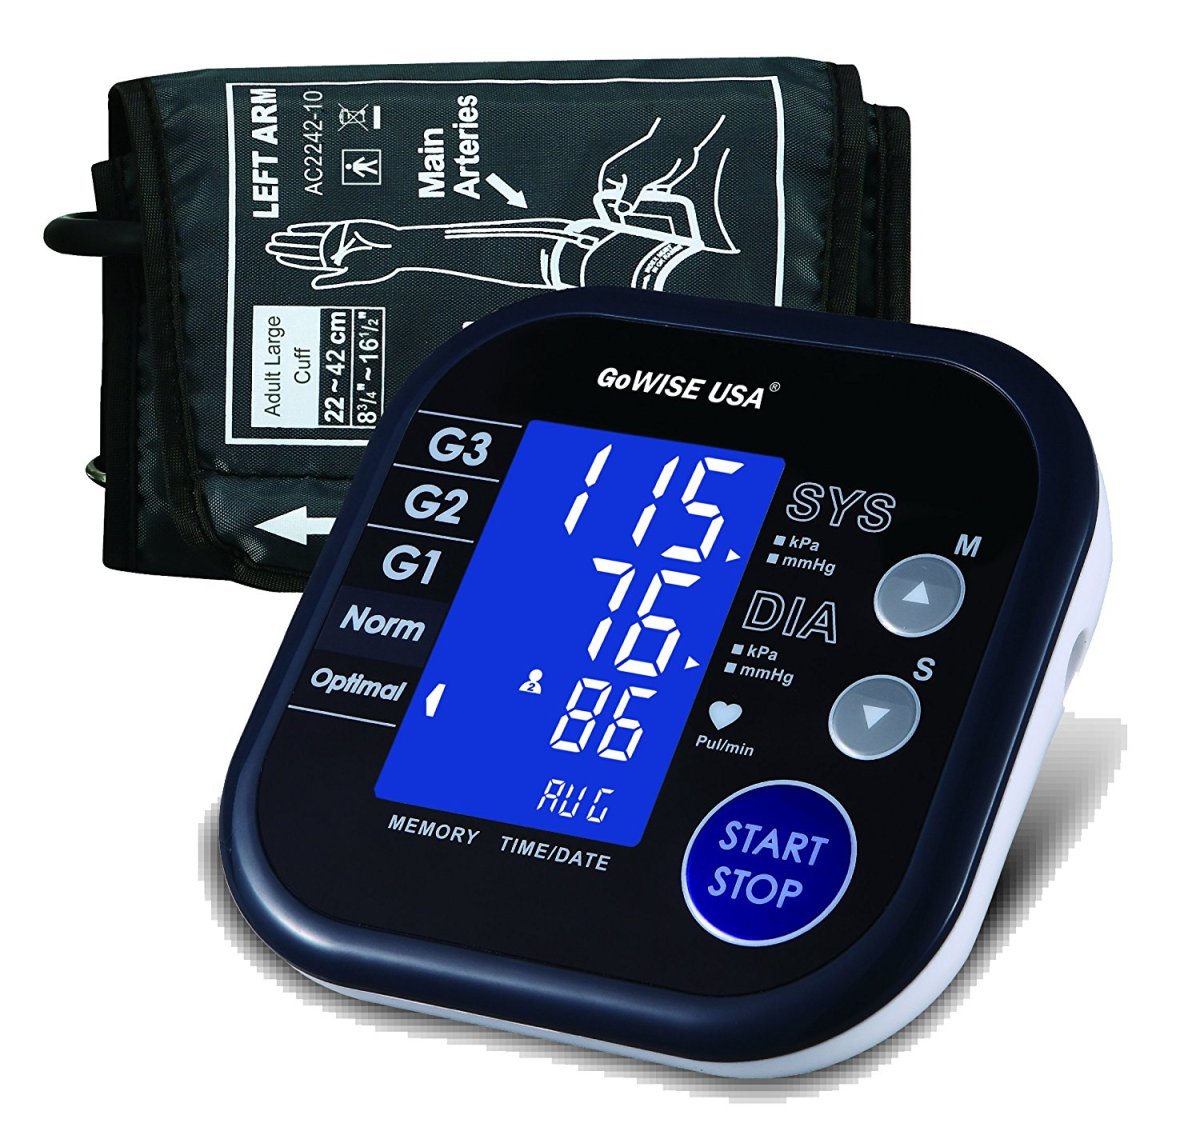 GoWISE USA Digital Blood Pressure Monitor $19.95 | Deals Of The Day